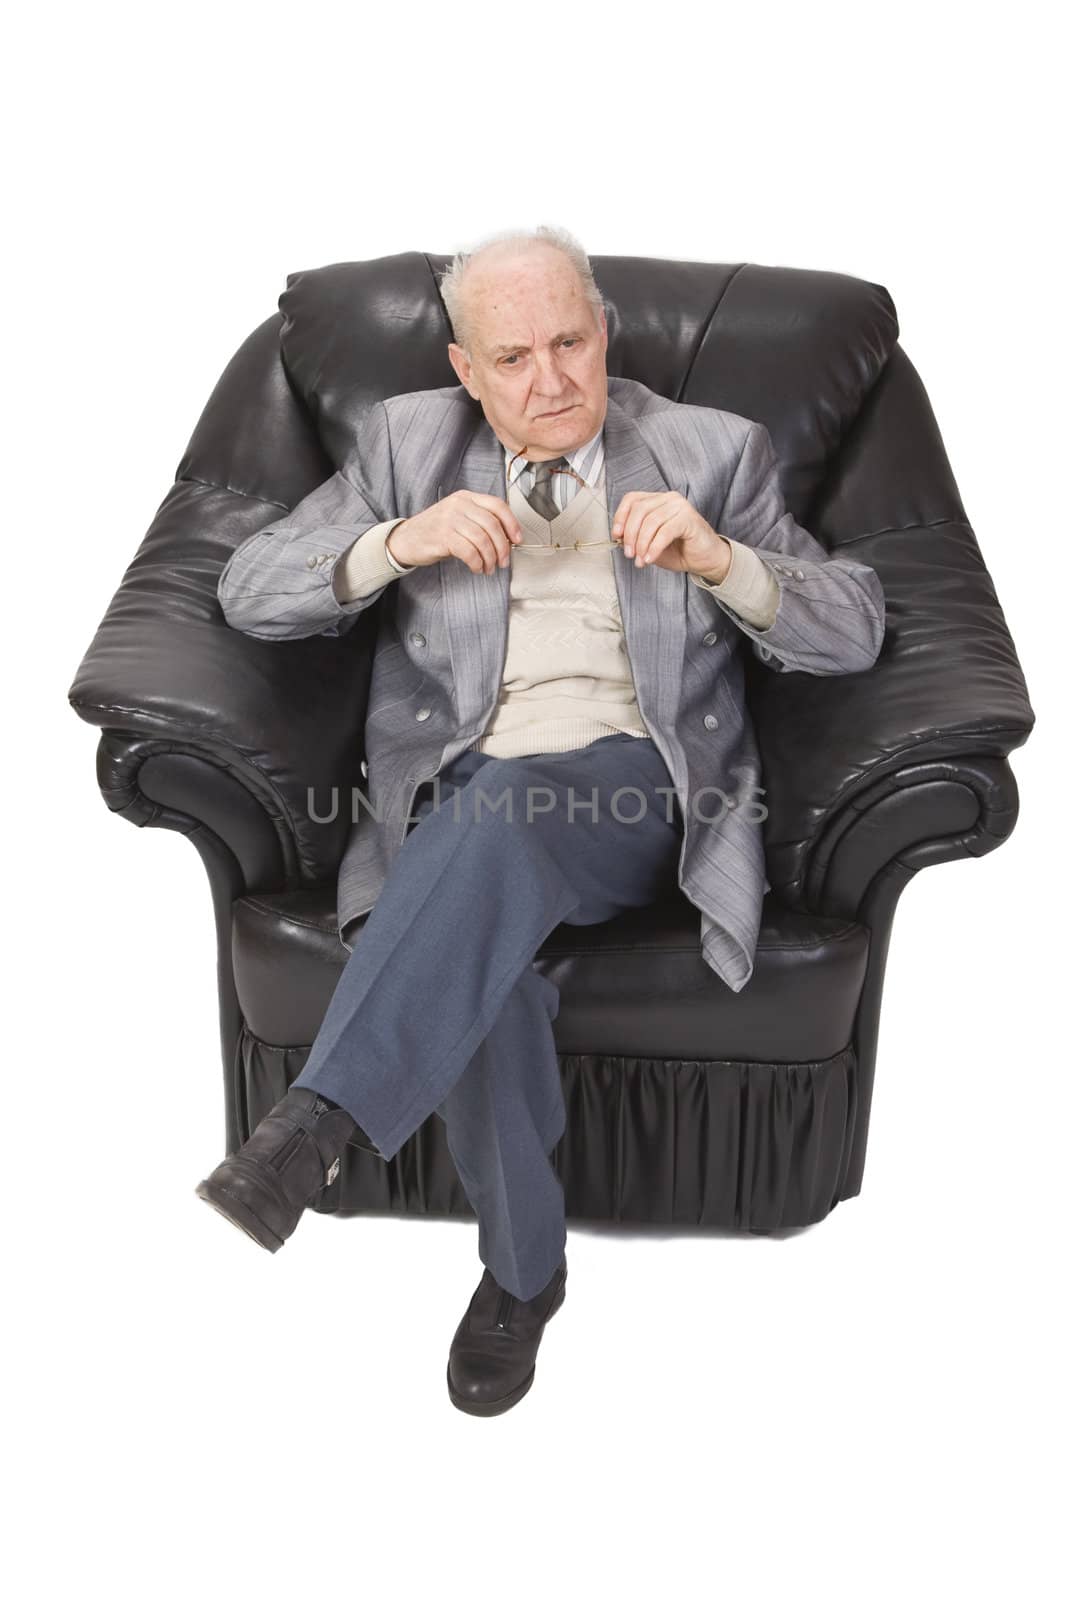 Senior man thinking and sitting in an armchair.Shot with Canon 70-200mm f/2.8L IS USM